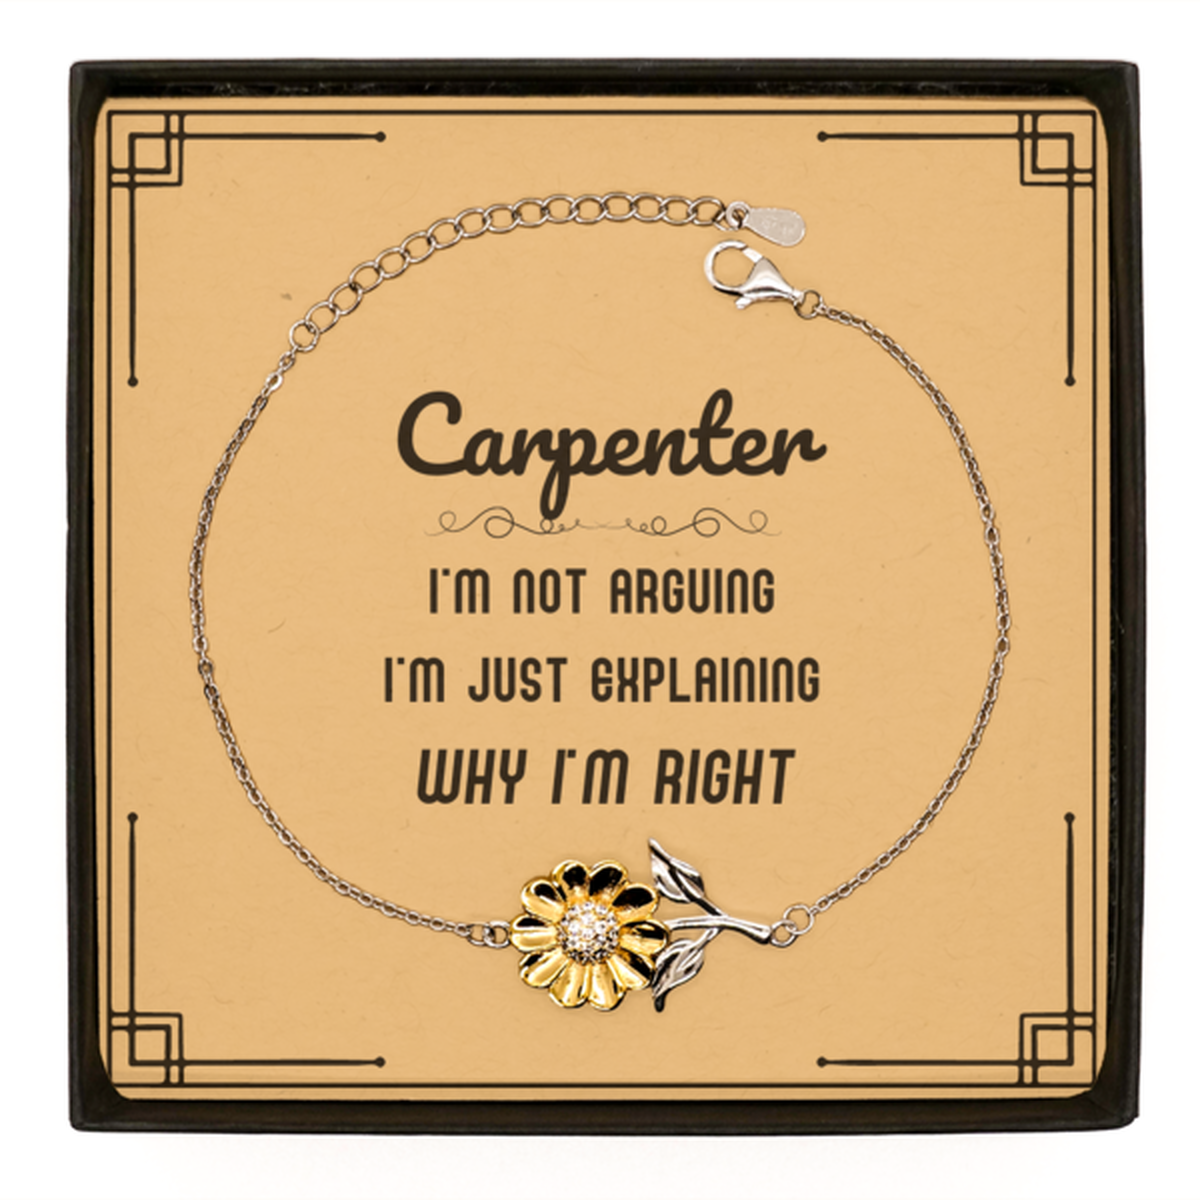 Carpenter I'm not Arguing. I'm Just Explaining Why I'm RIGHT Sunflower Bracelet, Funny Saying Quote Carpenter Gifts For Carpenter Message Card Graduation Birthday Christmas Gifts for Men Women Coworker